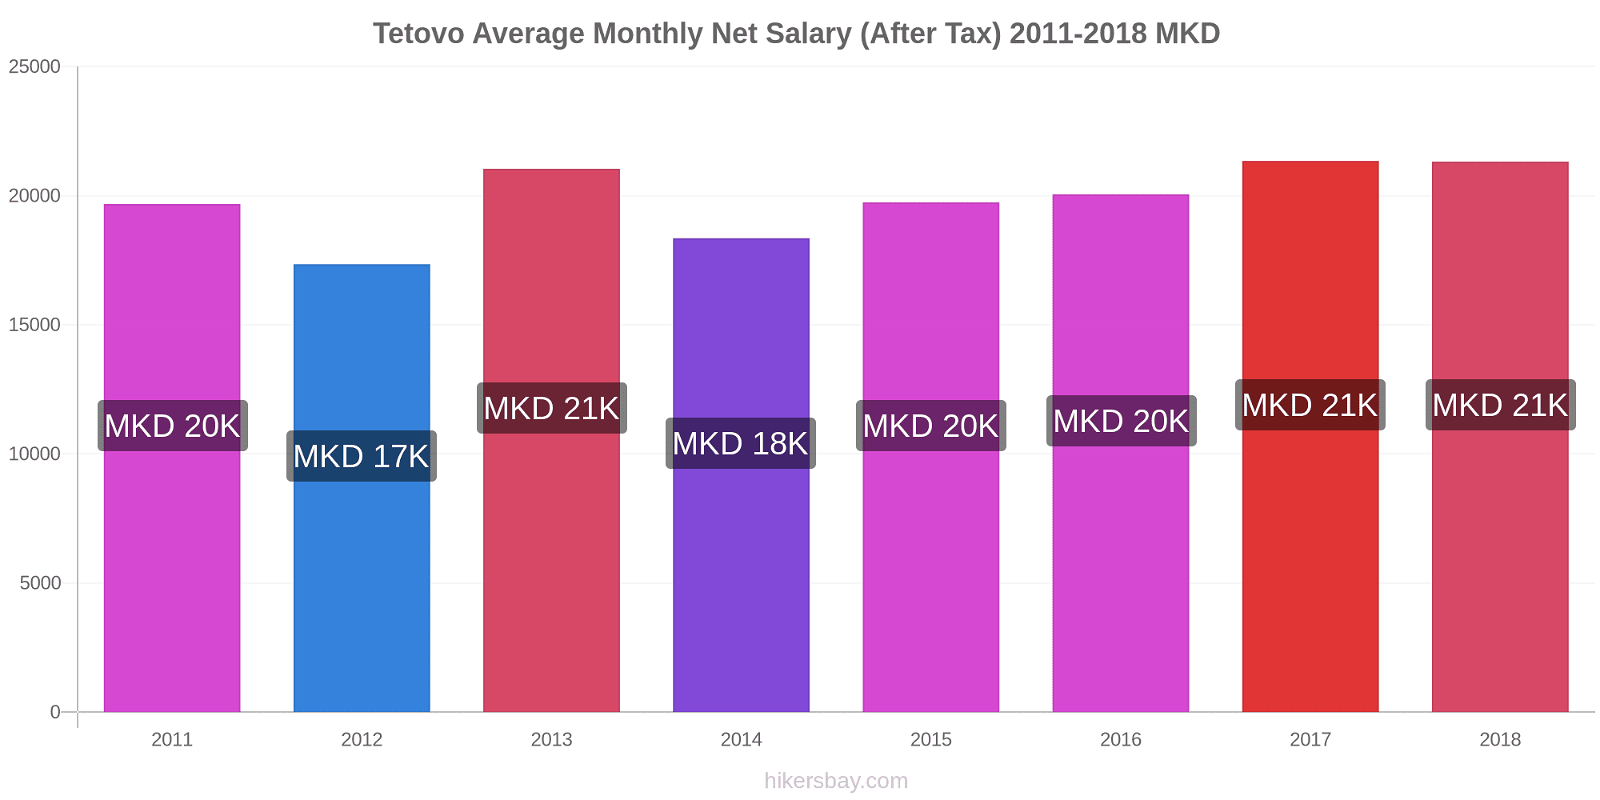 Tetovo price changes Average Monthly Net Salary (After Tax) hikersbay.com